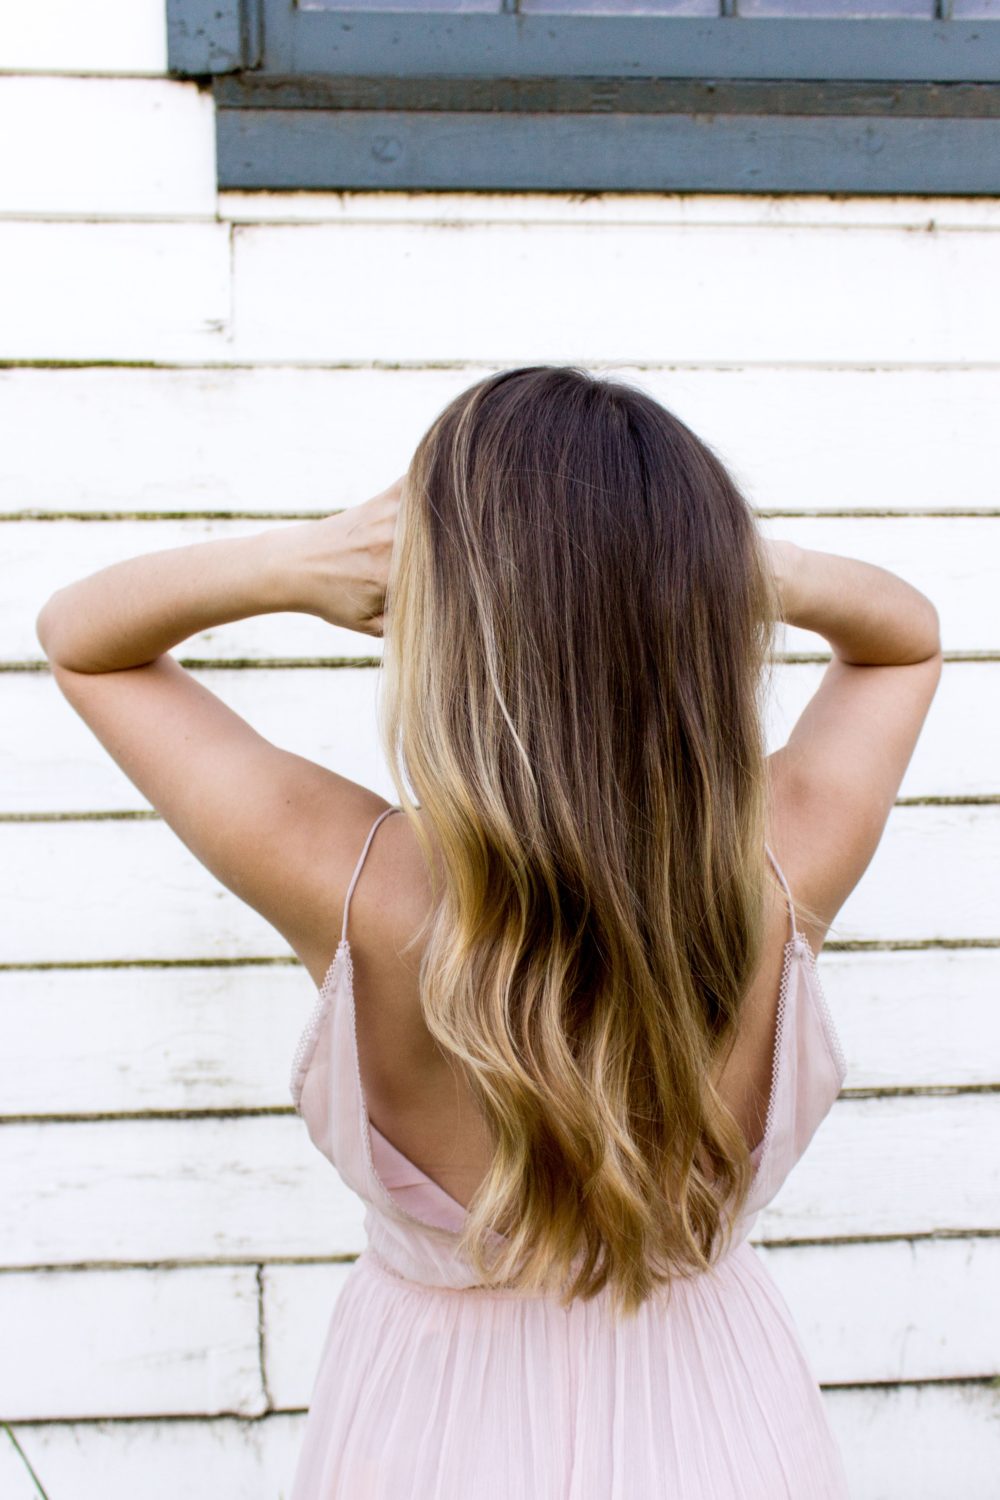 Itchy, Uncomfortable Scalp? These 2 DIY Treatments Will Change Everything